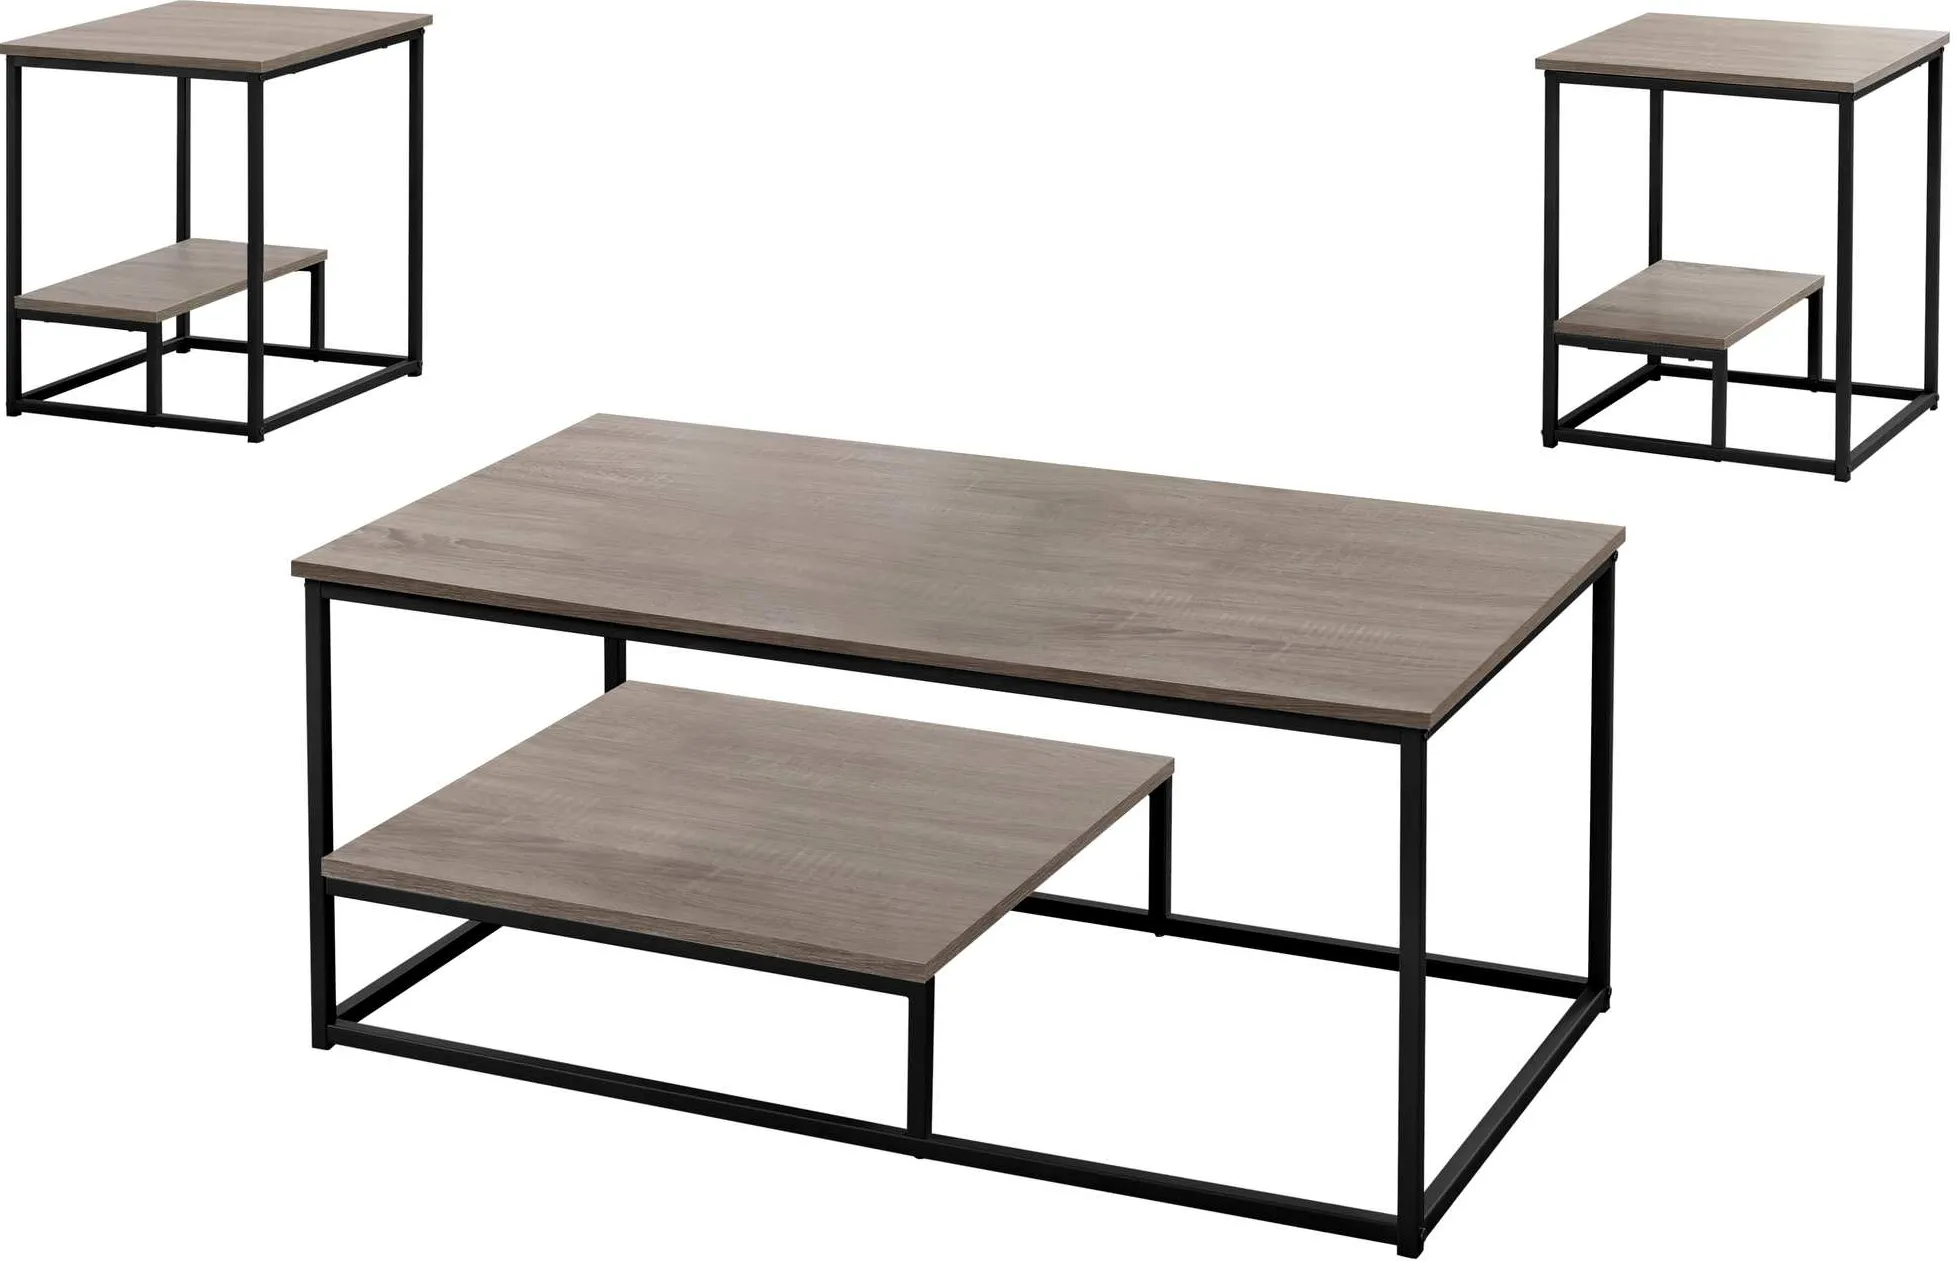 Table Set, 3Pcs Set, Coffee, End, Side, Accent, Living Room, Metal, Laminate, Brown, Black, Contemporary, Modern